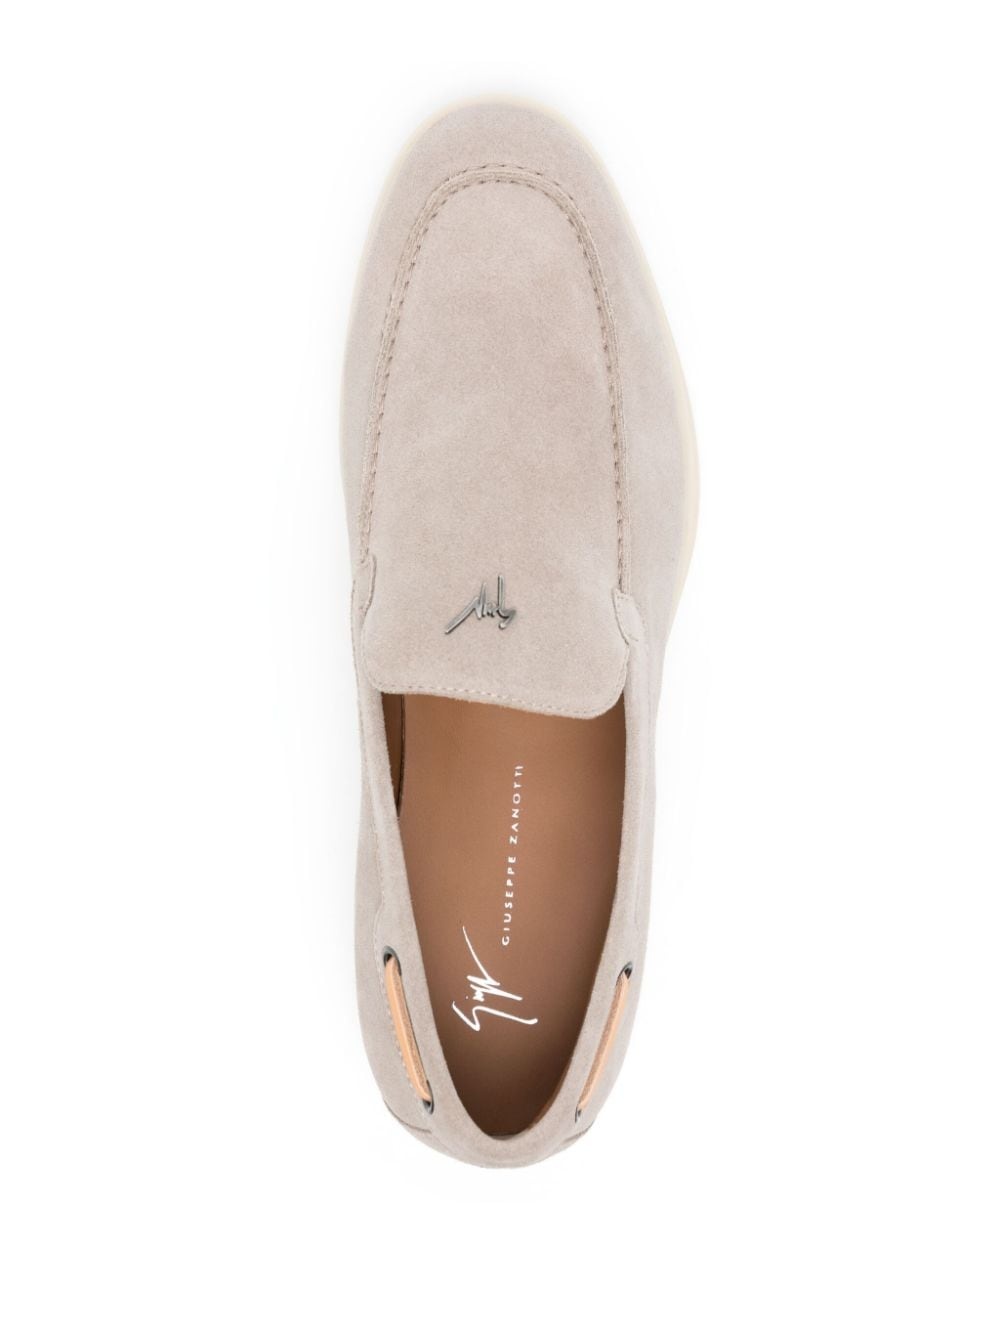 The Maui suede loafers - 4